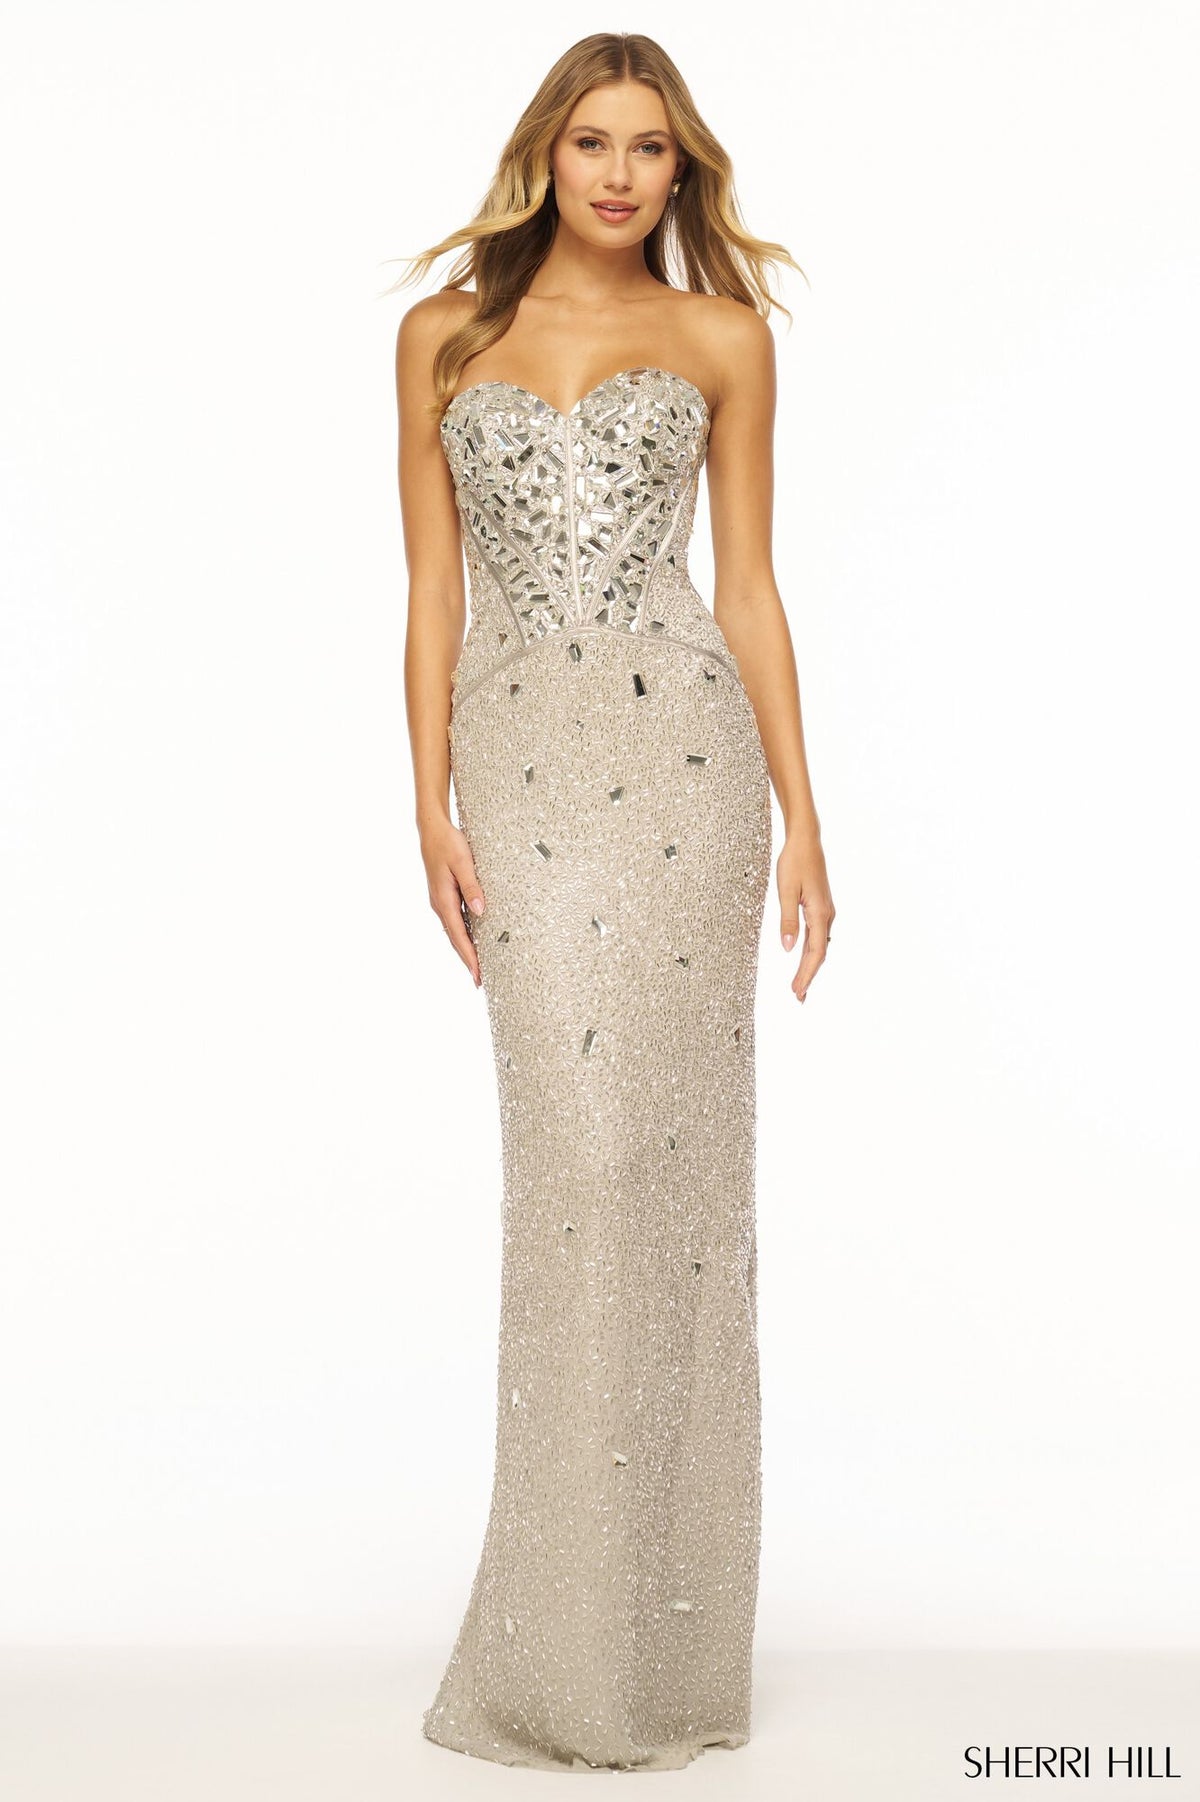 Sherri Hill 56175 Stunning Strapless Liquid Beaded Formal Evening Gown - A breathtaking gown featuring a strapless design, fitted silhouette, and exquisite cut glass embellishments on a liquid beaded fabric.  Front View